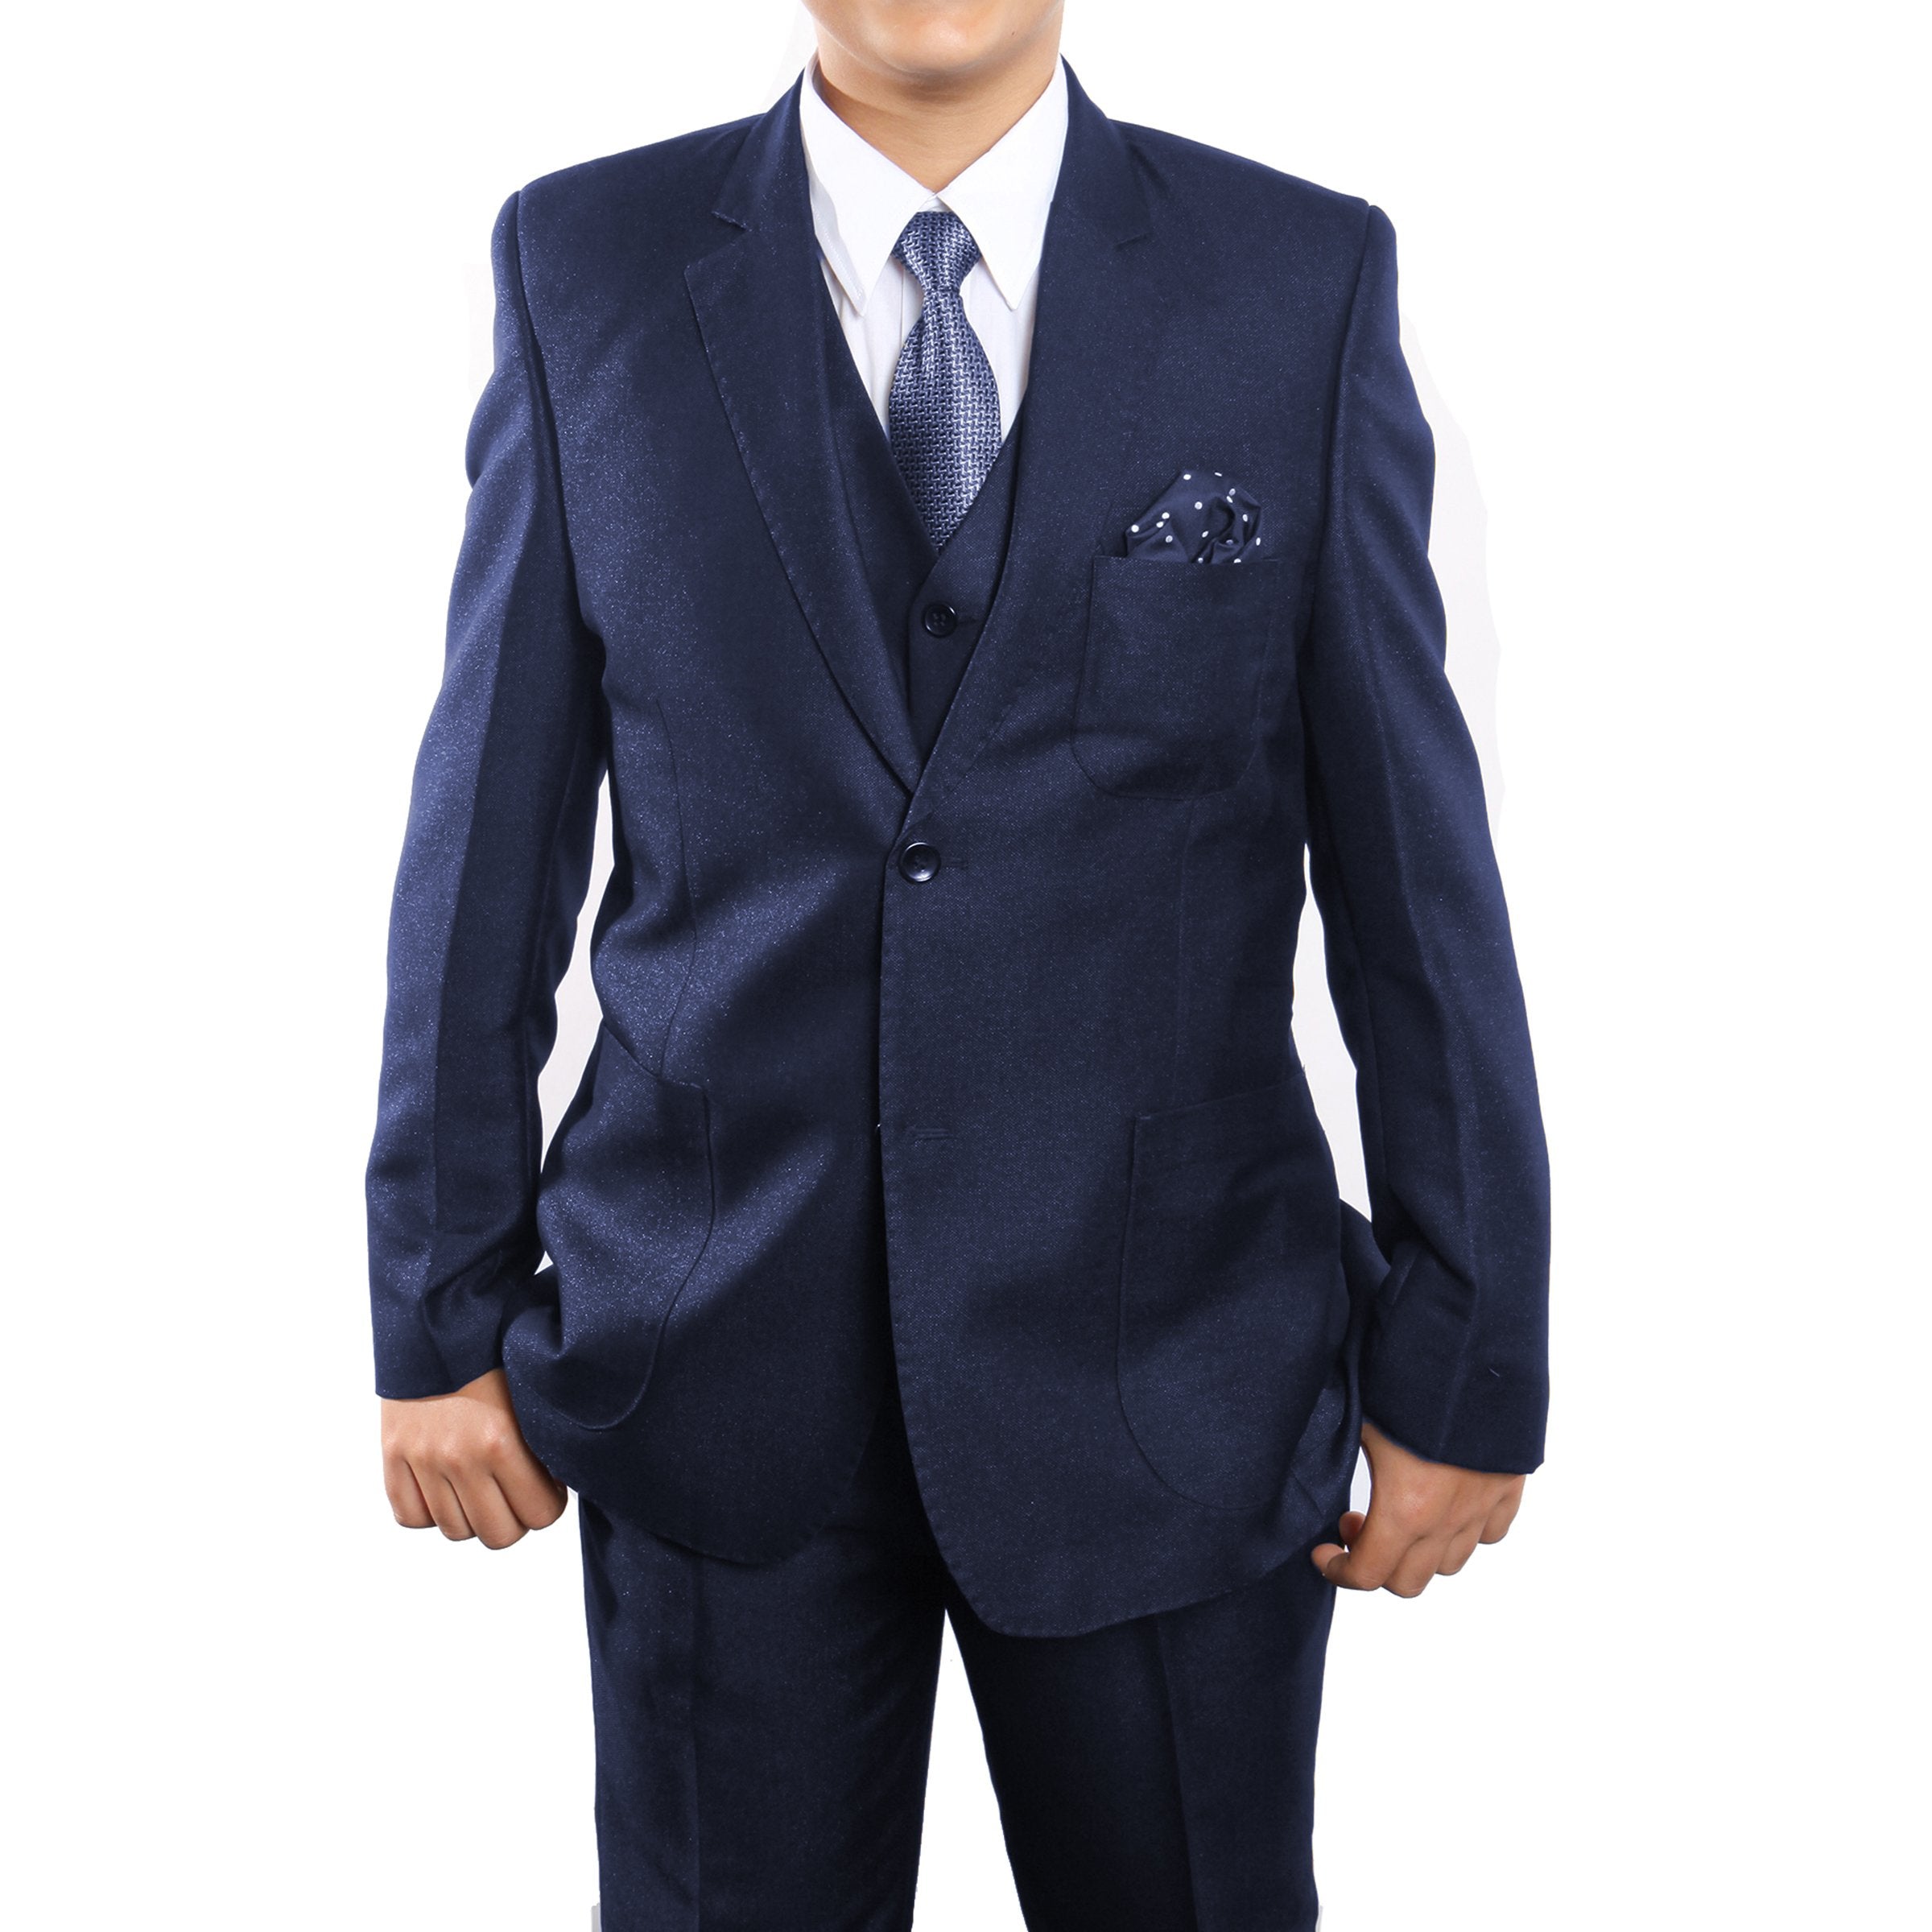 5 PC Boy's With Matching Shirt & Tie Suits For Boy's